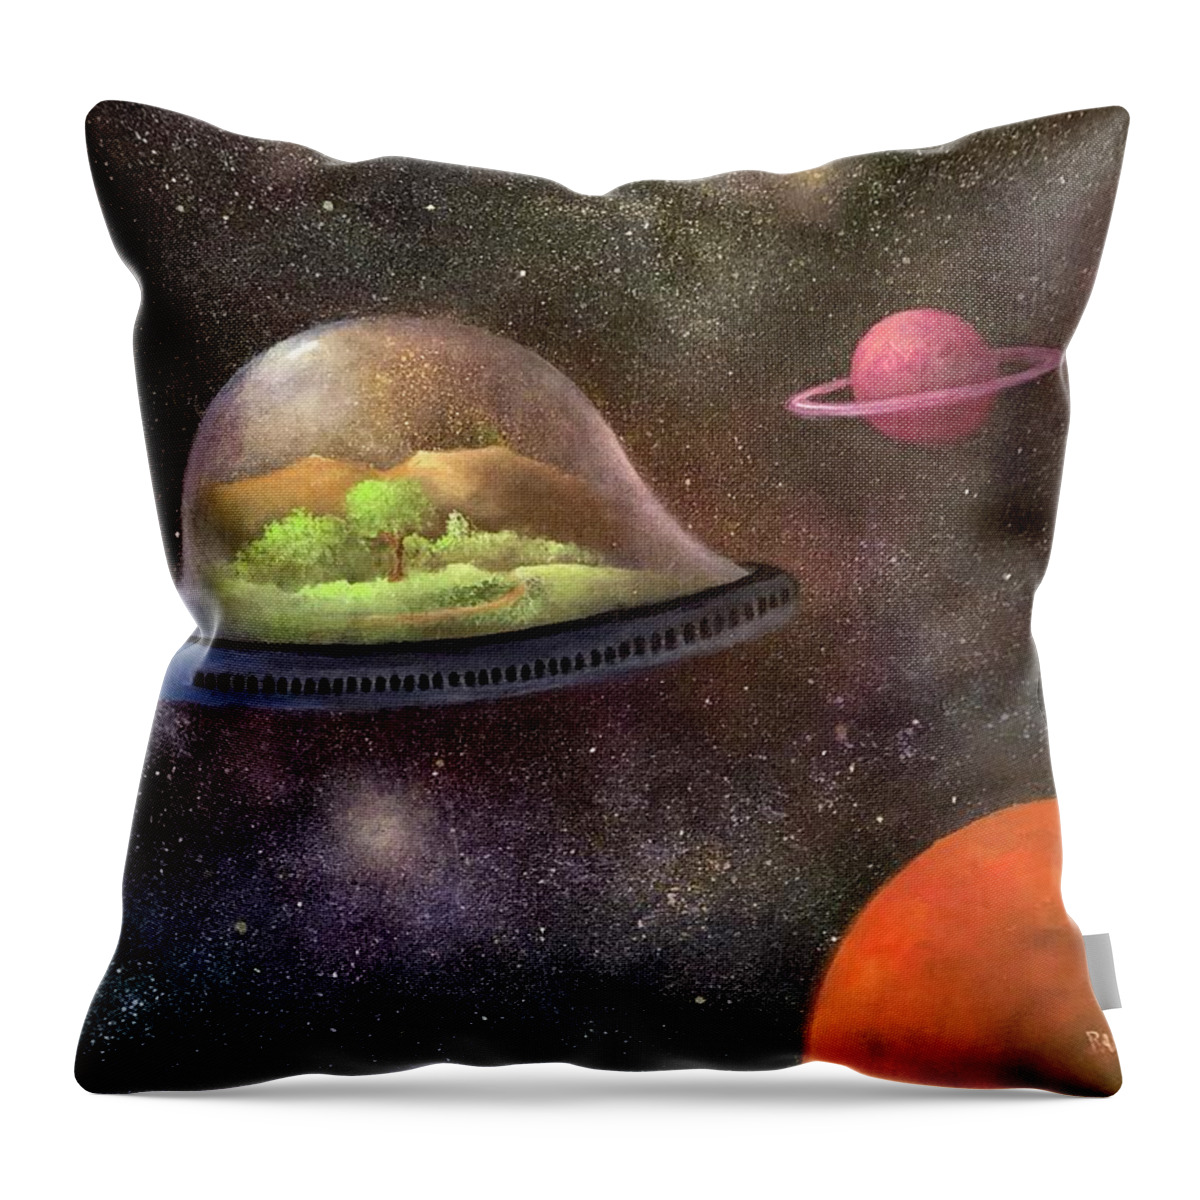 Space Throw Pillow featuring the painting They Took Their World With Them by Rand Burns